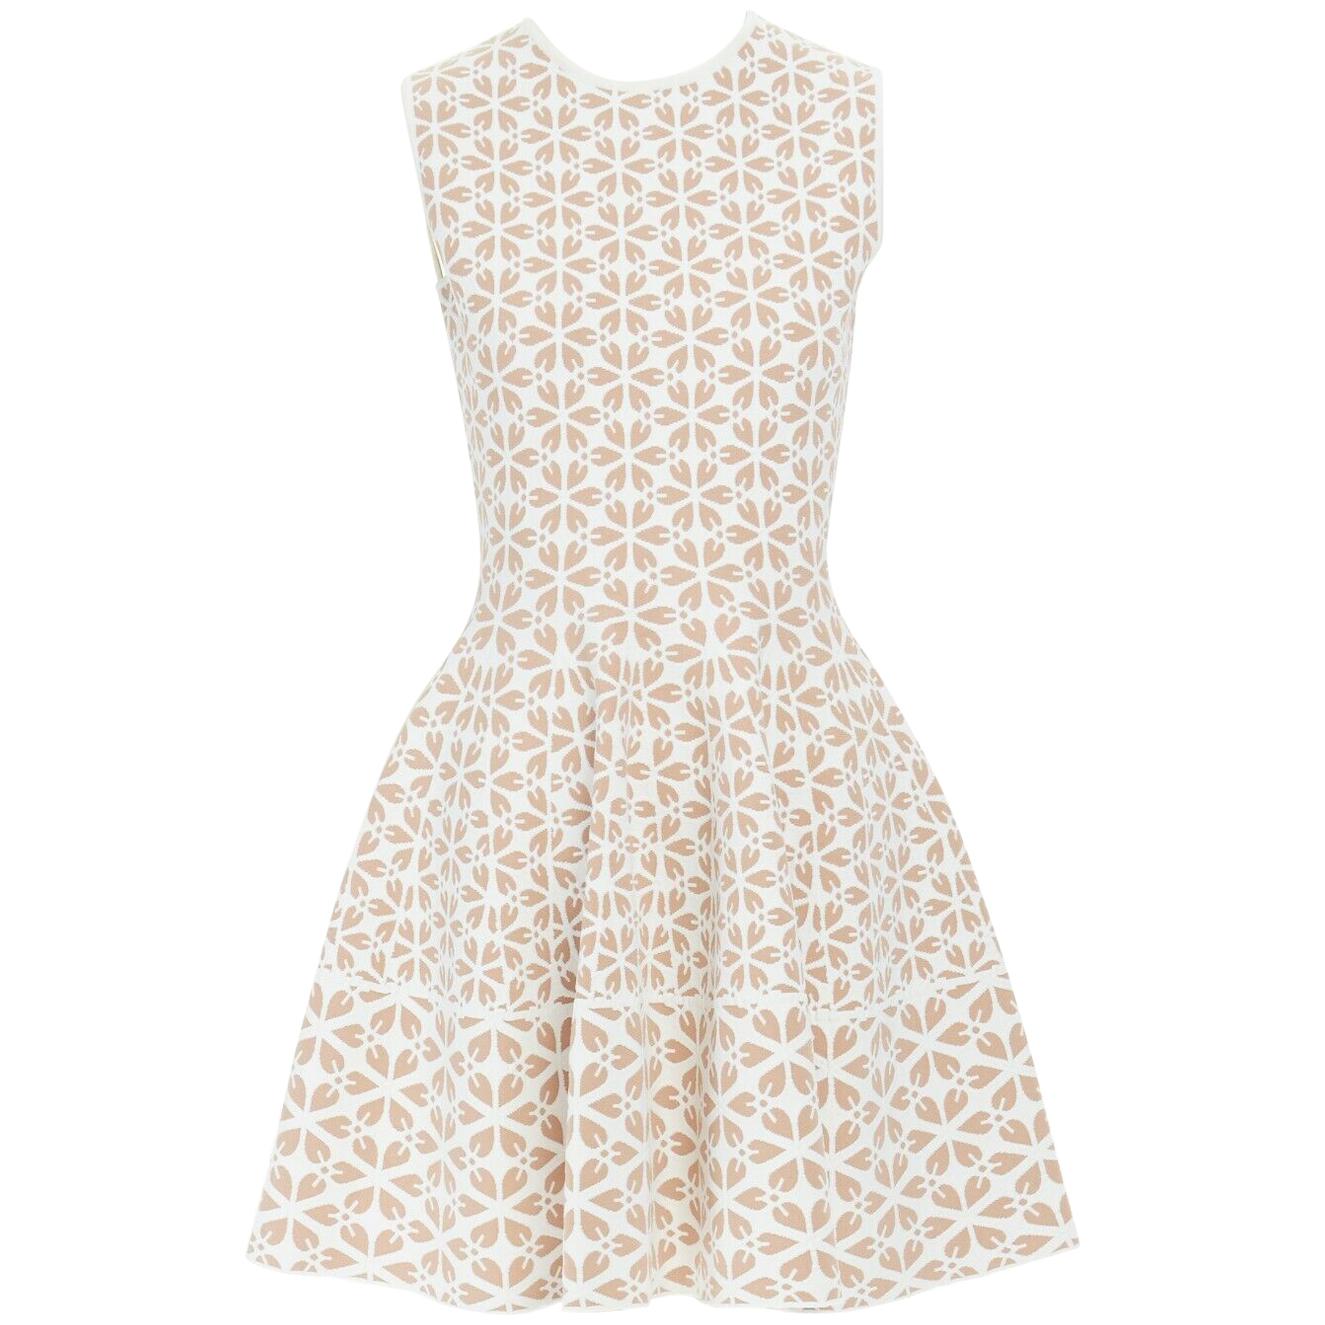 ALEXANDER MCQUEEN white nude geomtric leaf pattern jacquard fit flare dress M